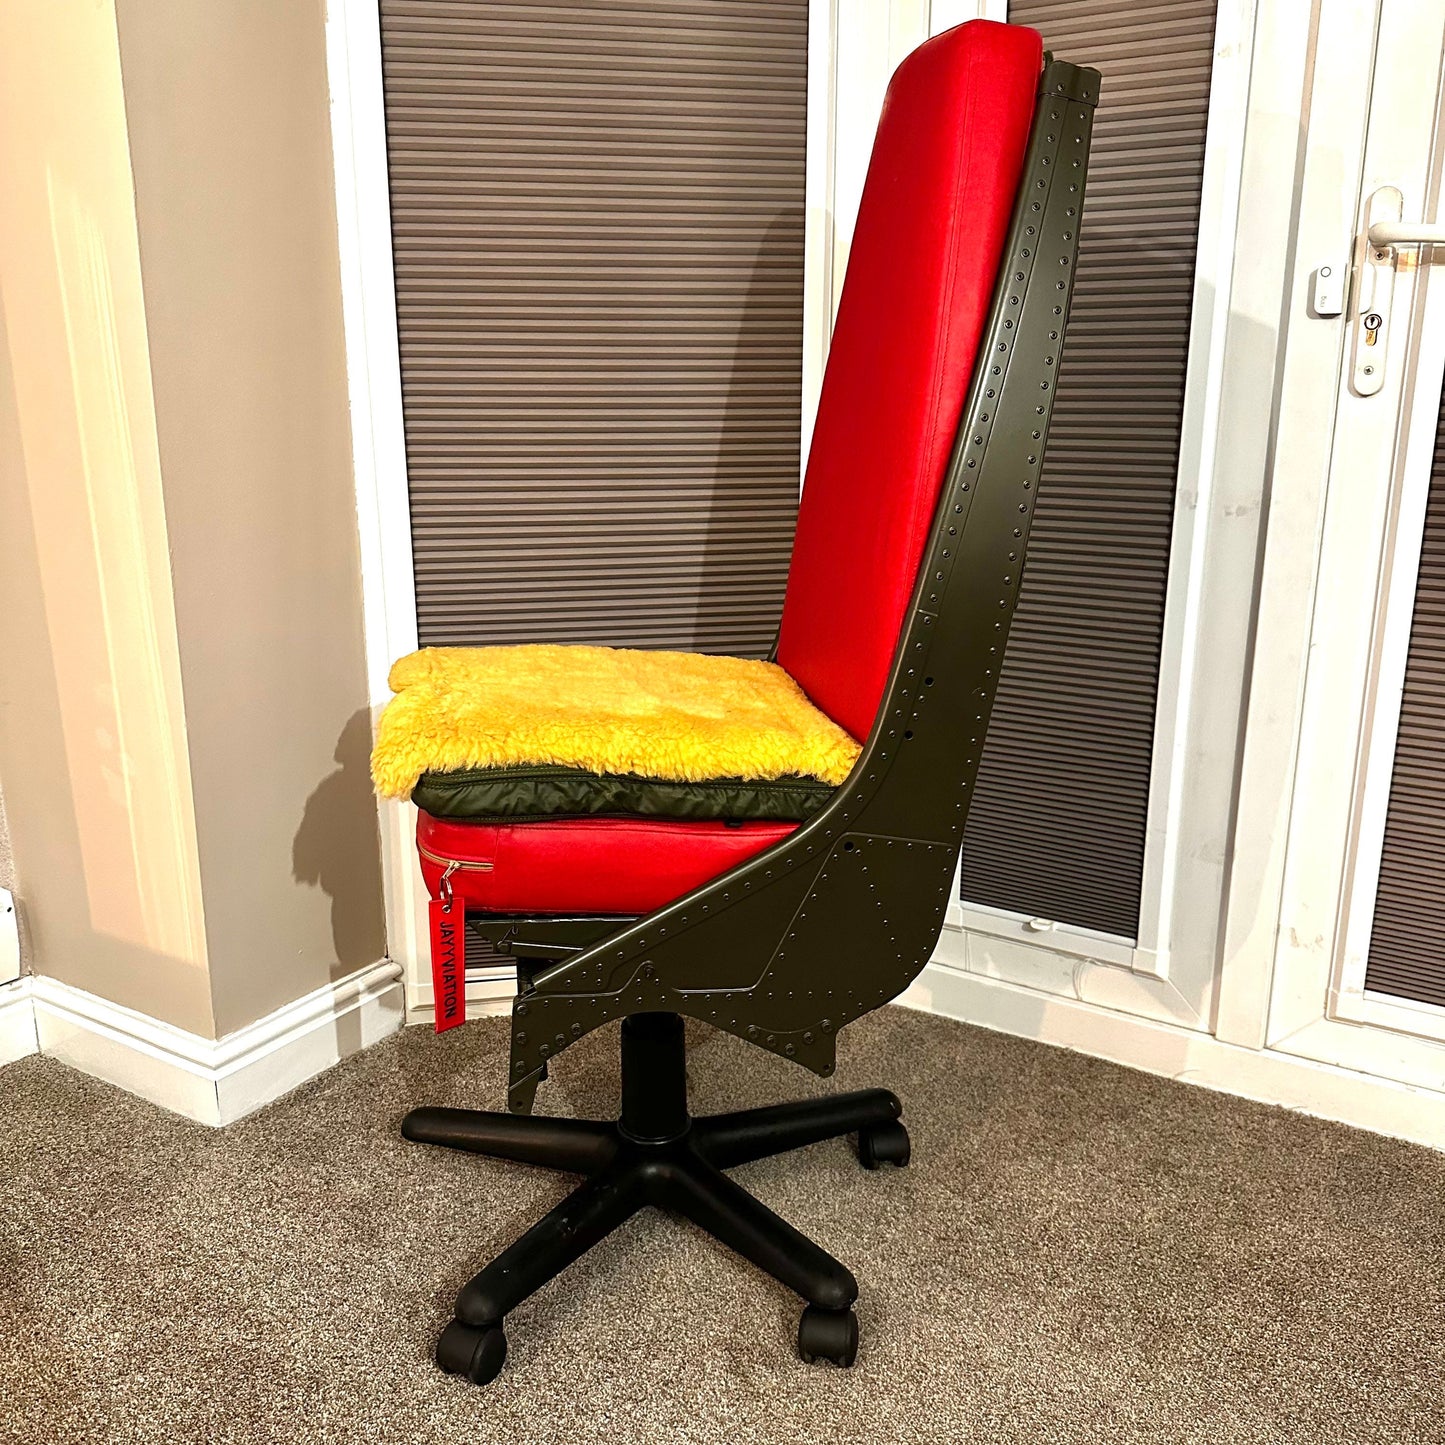 Westland Lynx Helicopter Army Pilot Seat Desk Chair Cockpit First Officer Upcycled Office Desk Chair Captain Officer